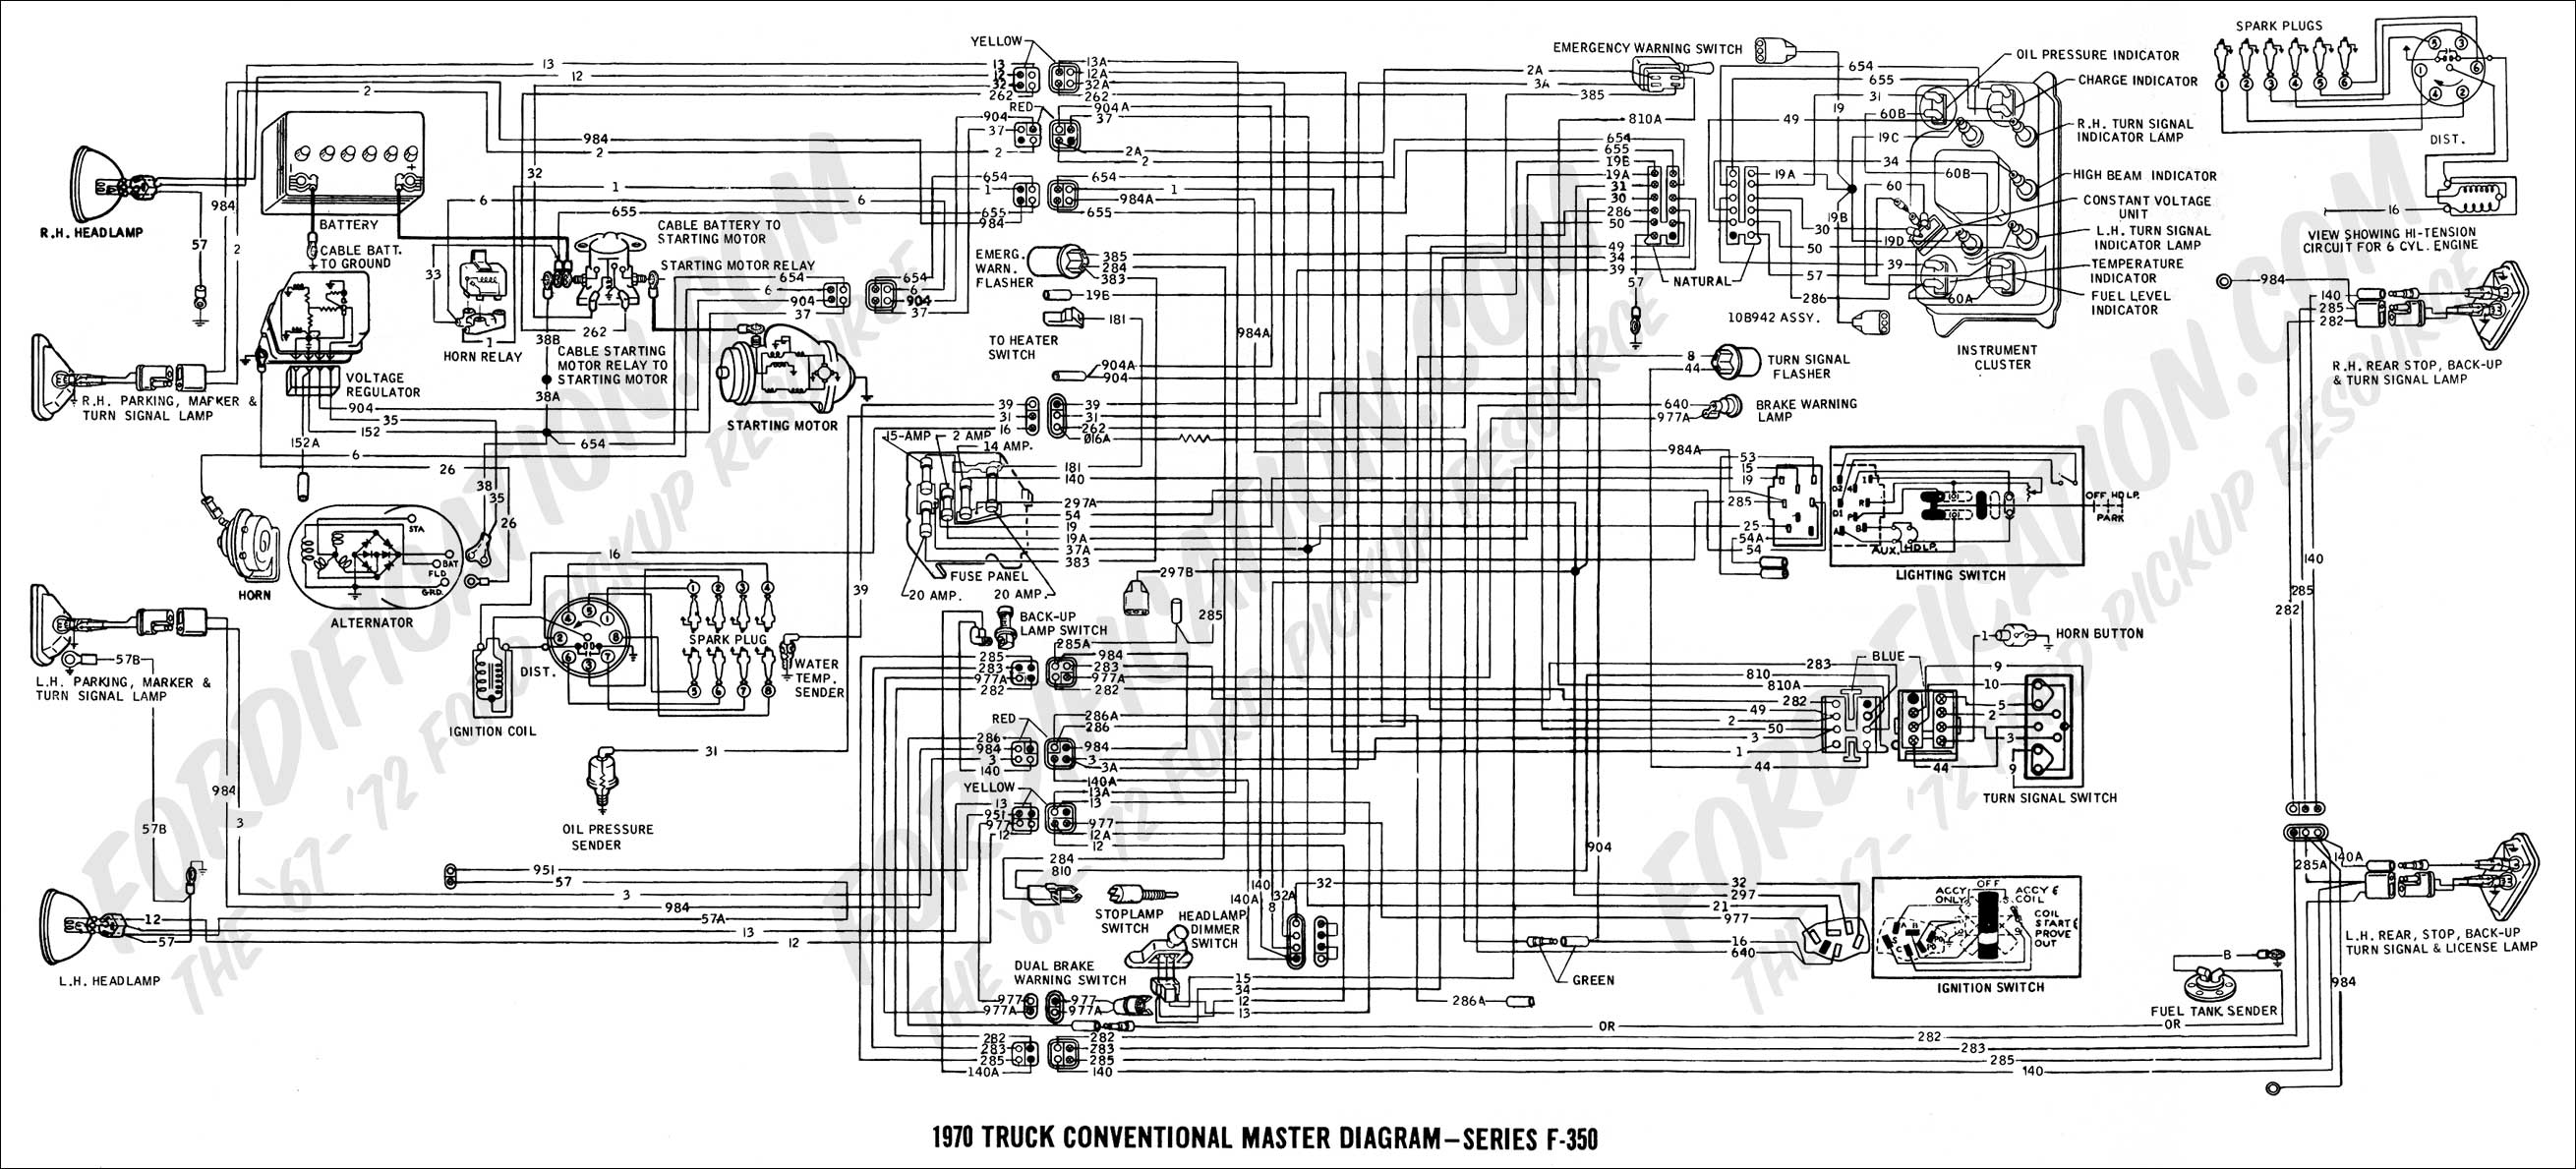 Wiring Diagram 1995 Ford Explorer from www.fordification.com